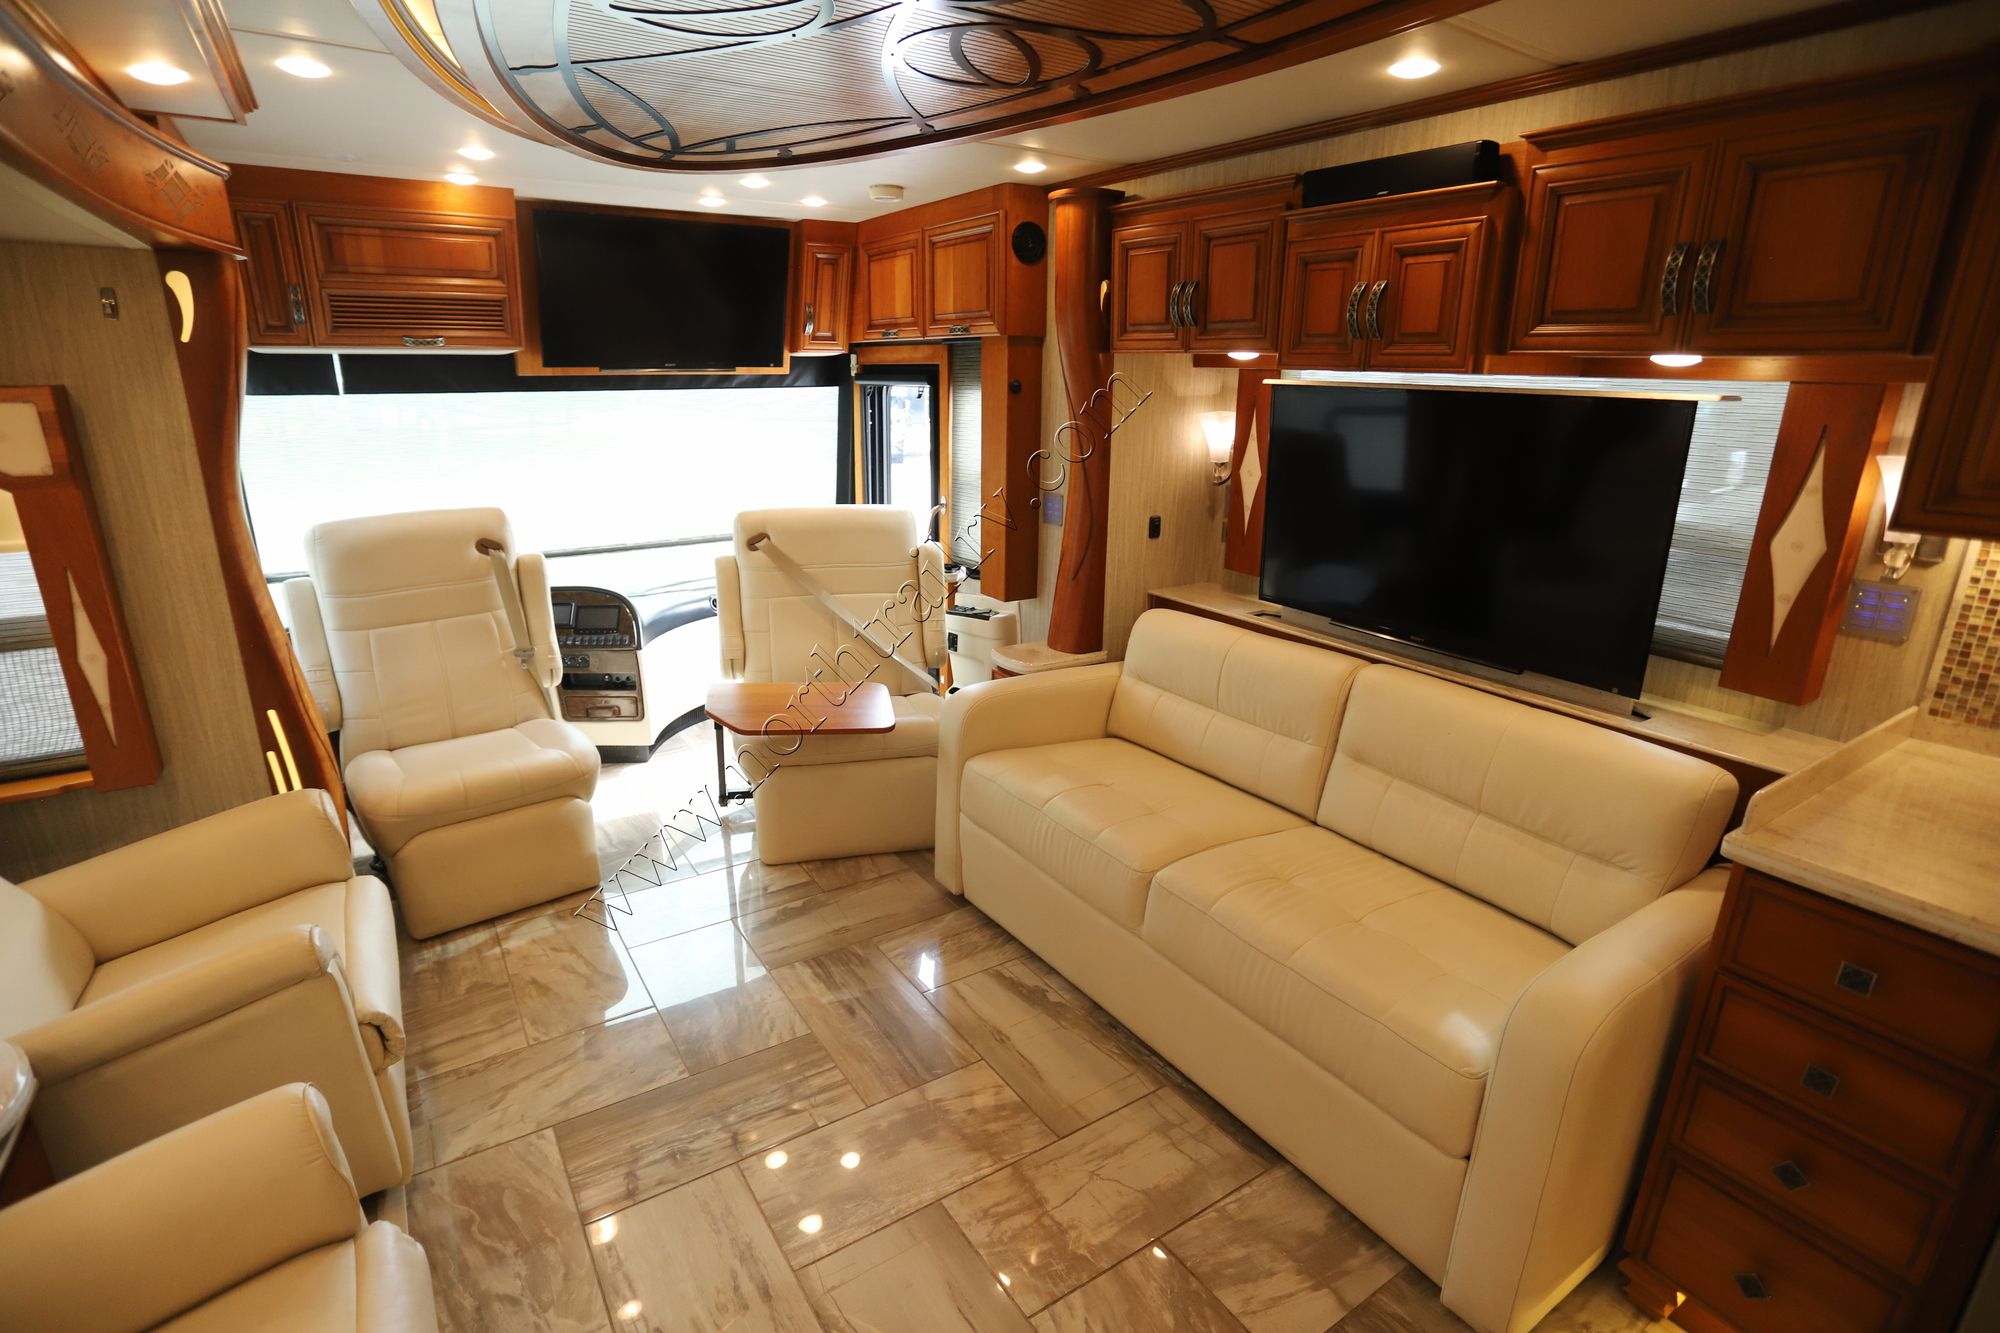 Used 2016 Newmar London Aire 4519 Class A  For Sale